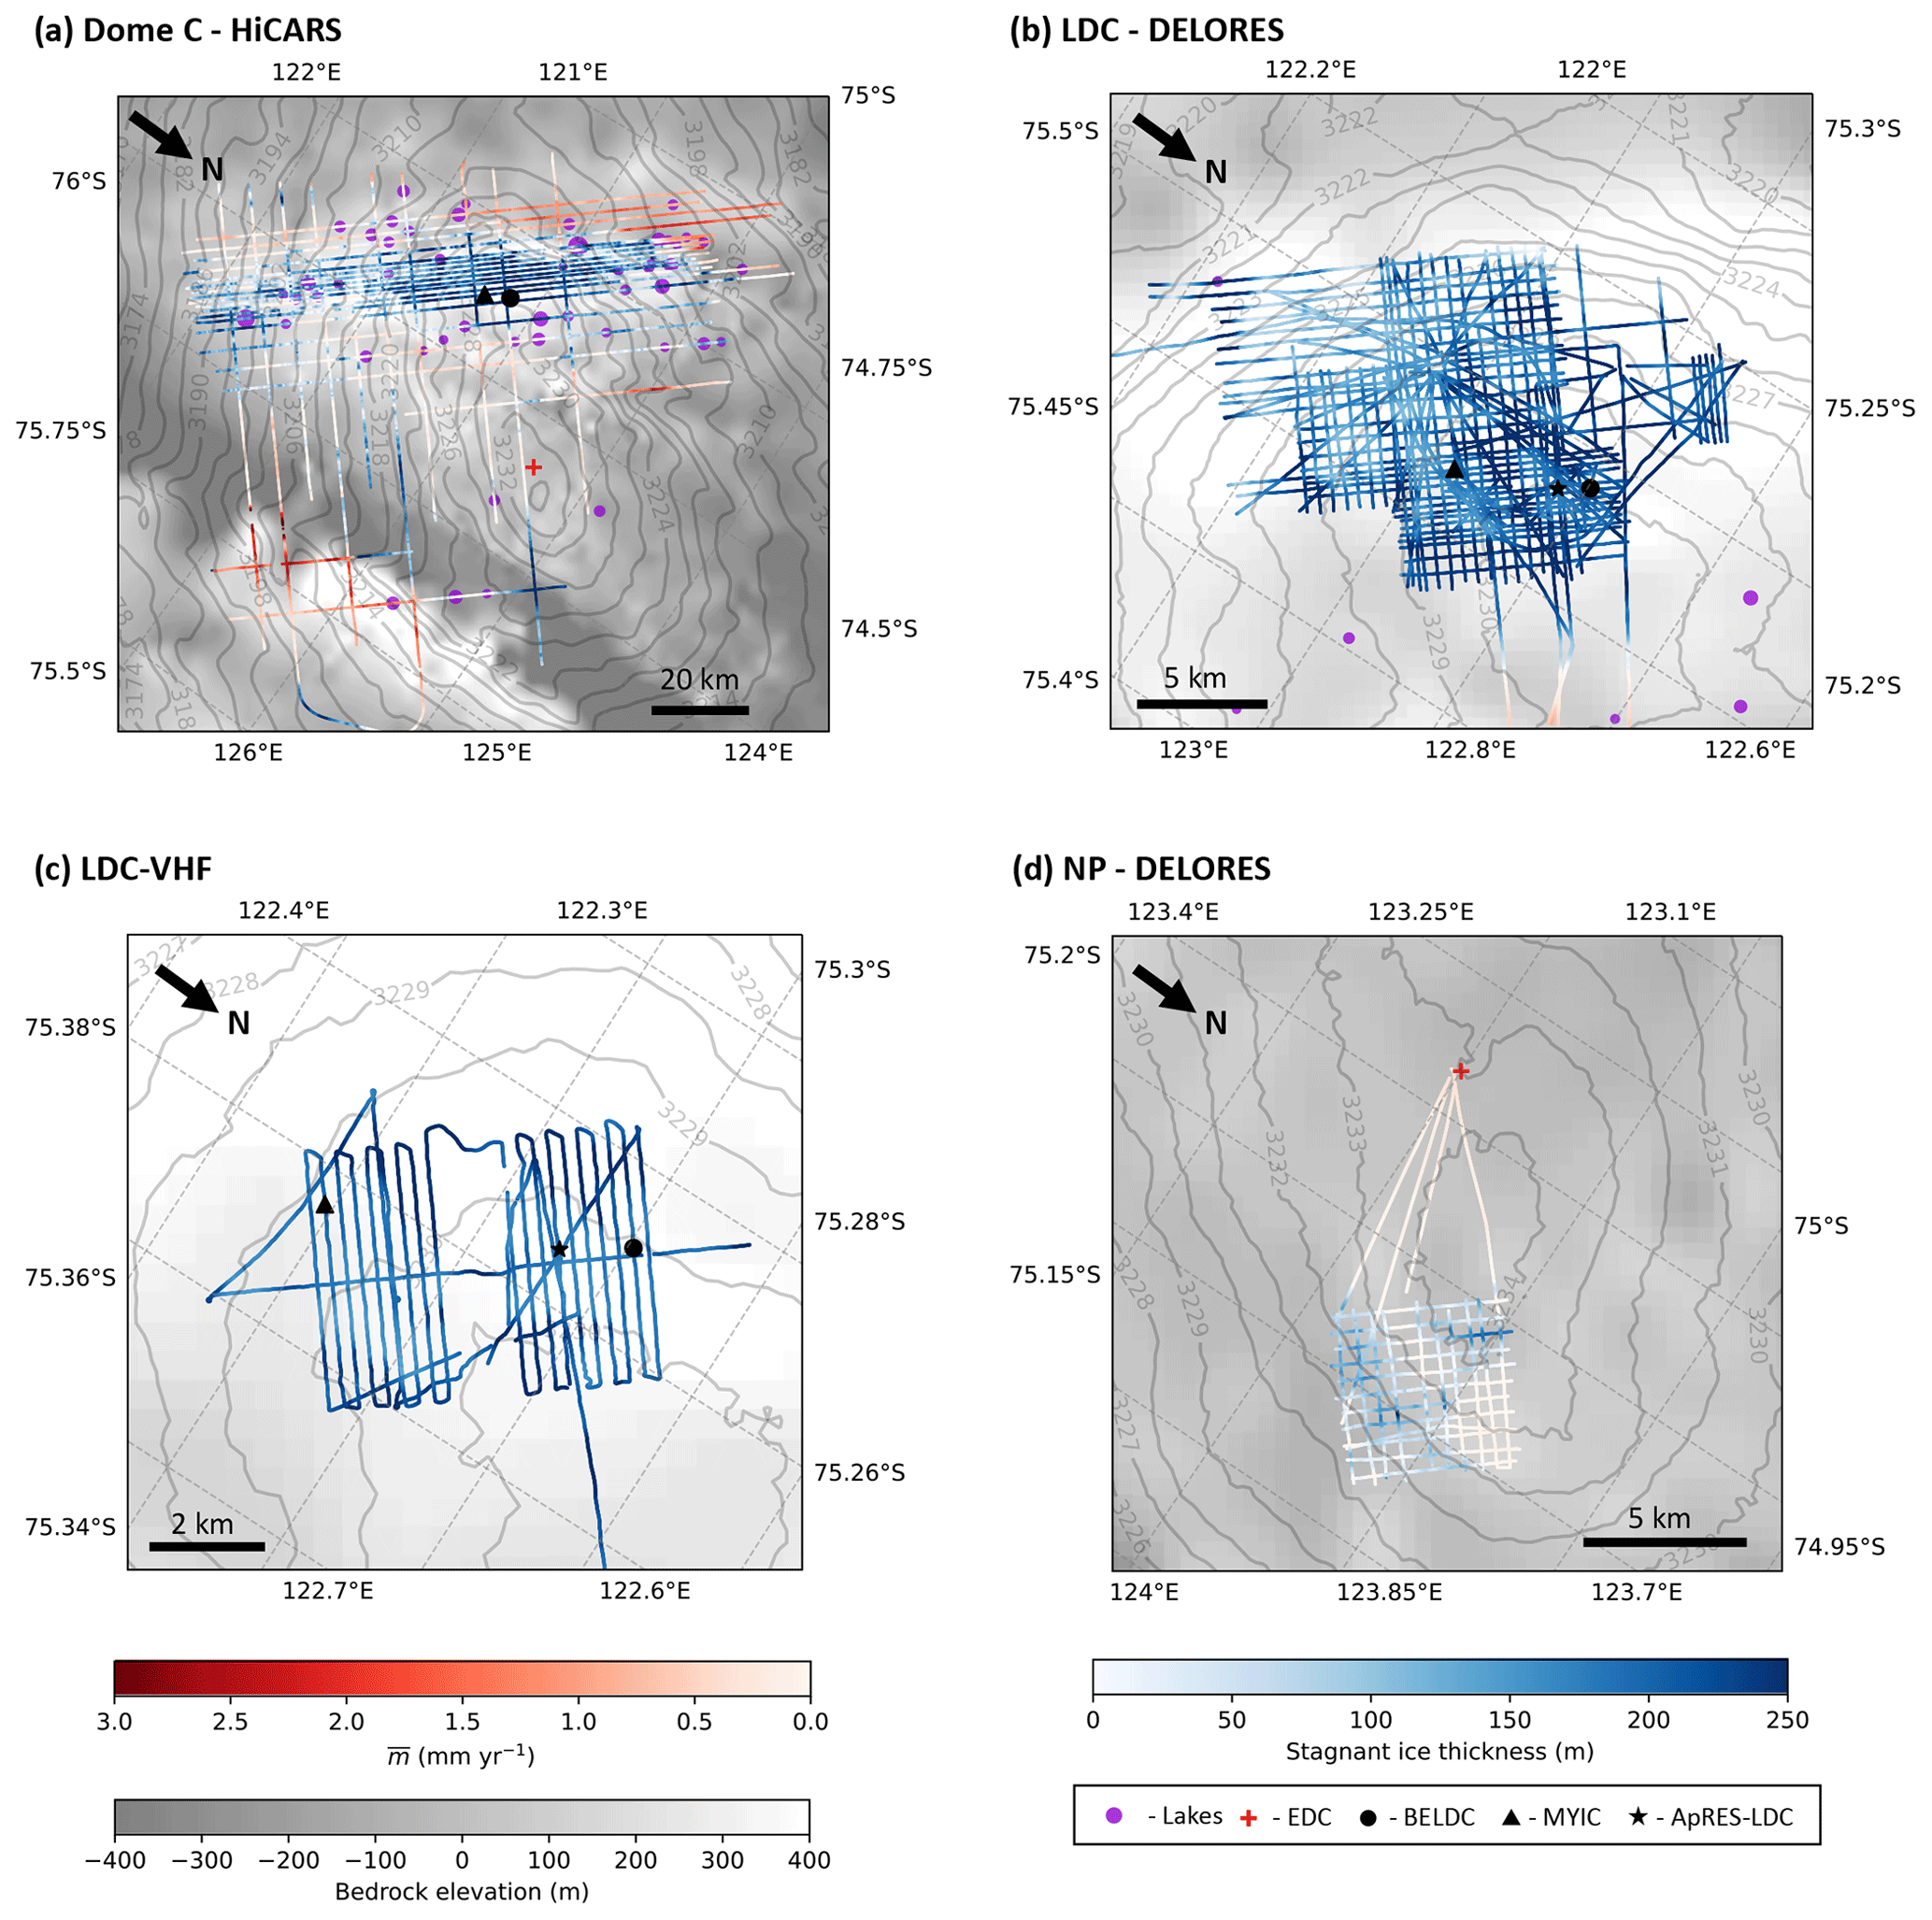 TC - Stagnant ice and age modelling in the Dome C region, Antarctica